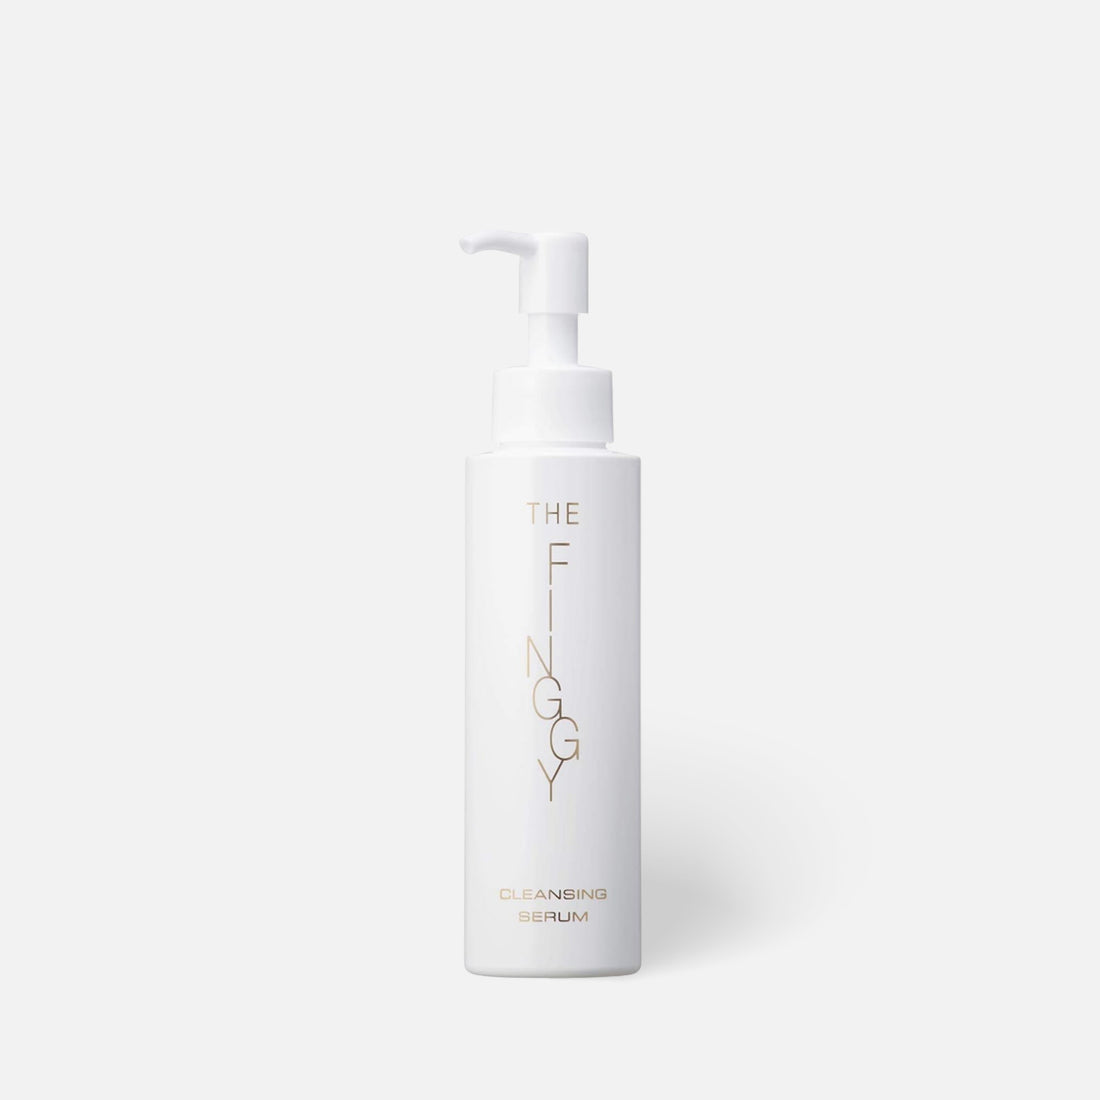 THE FINGGY Cleansing Serum 120ml